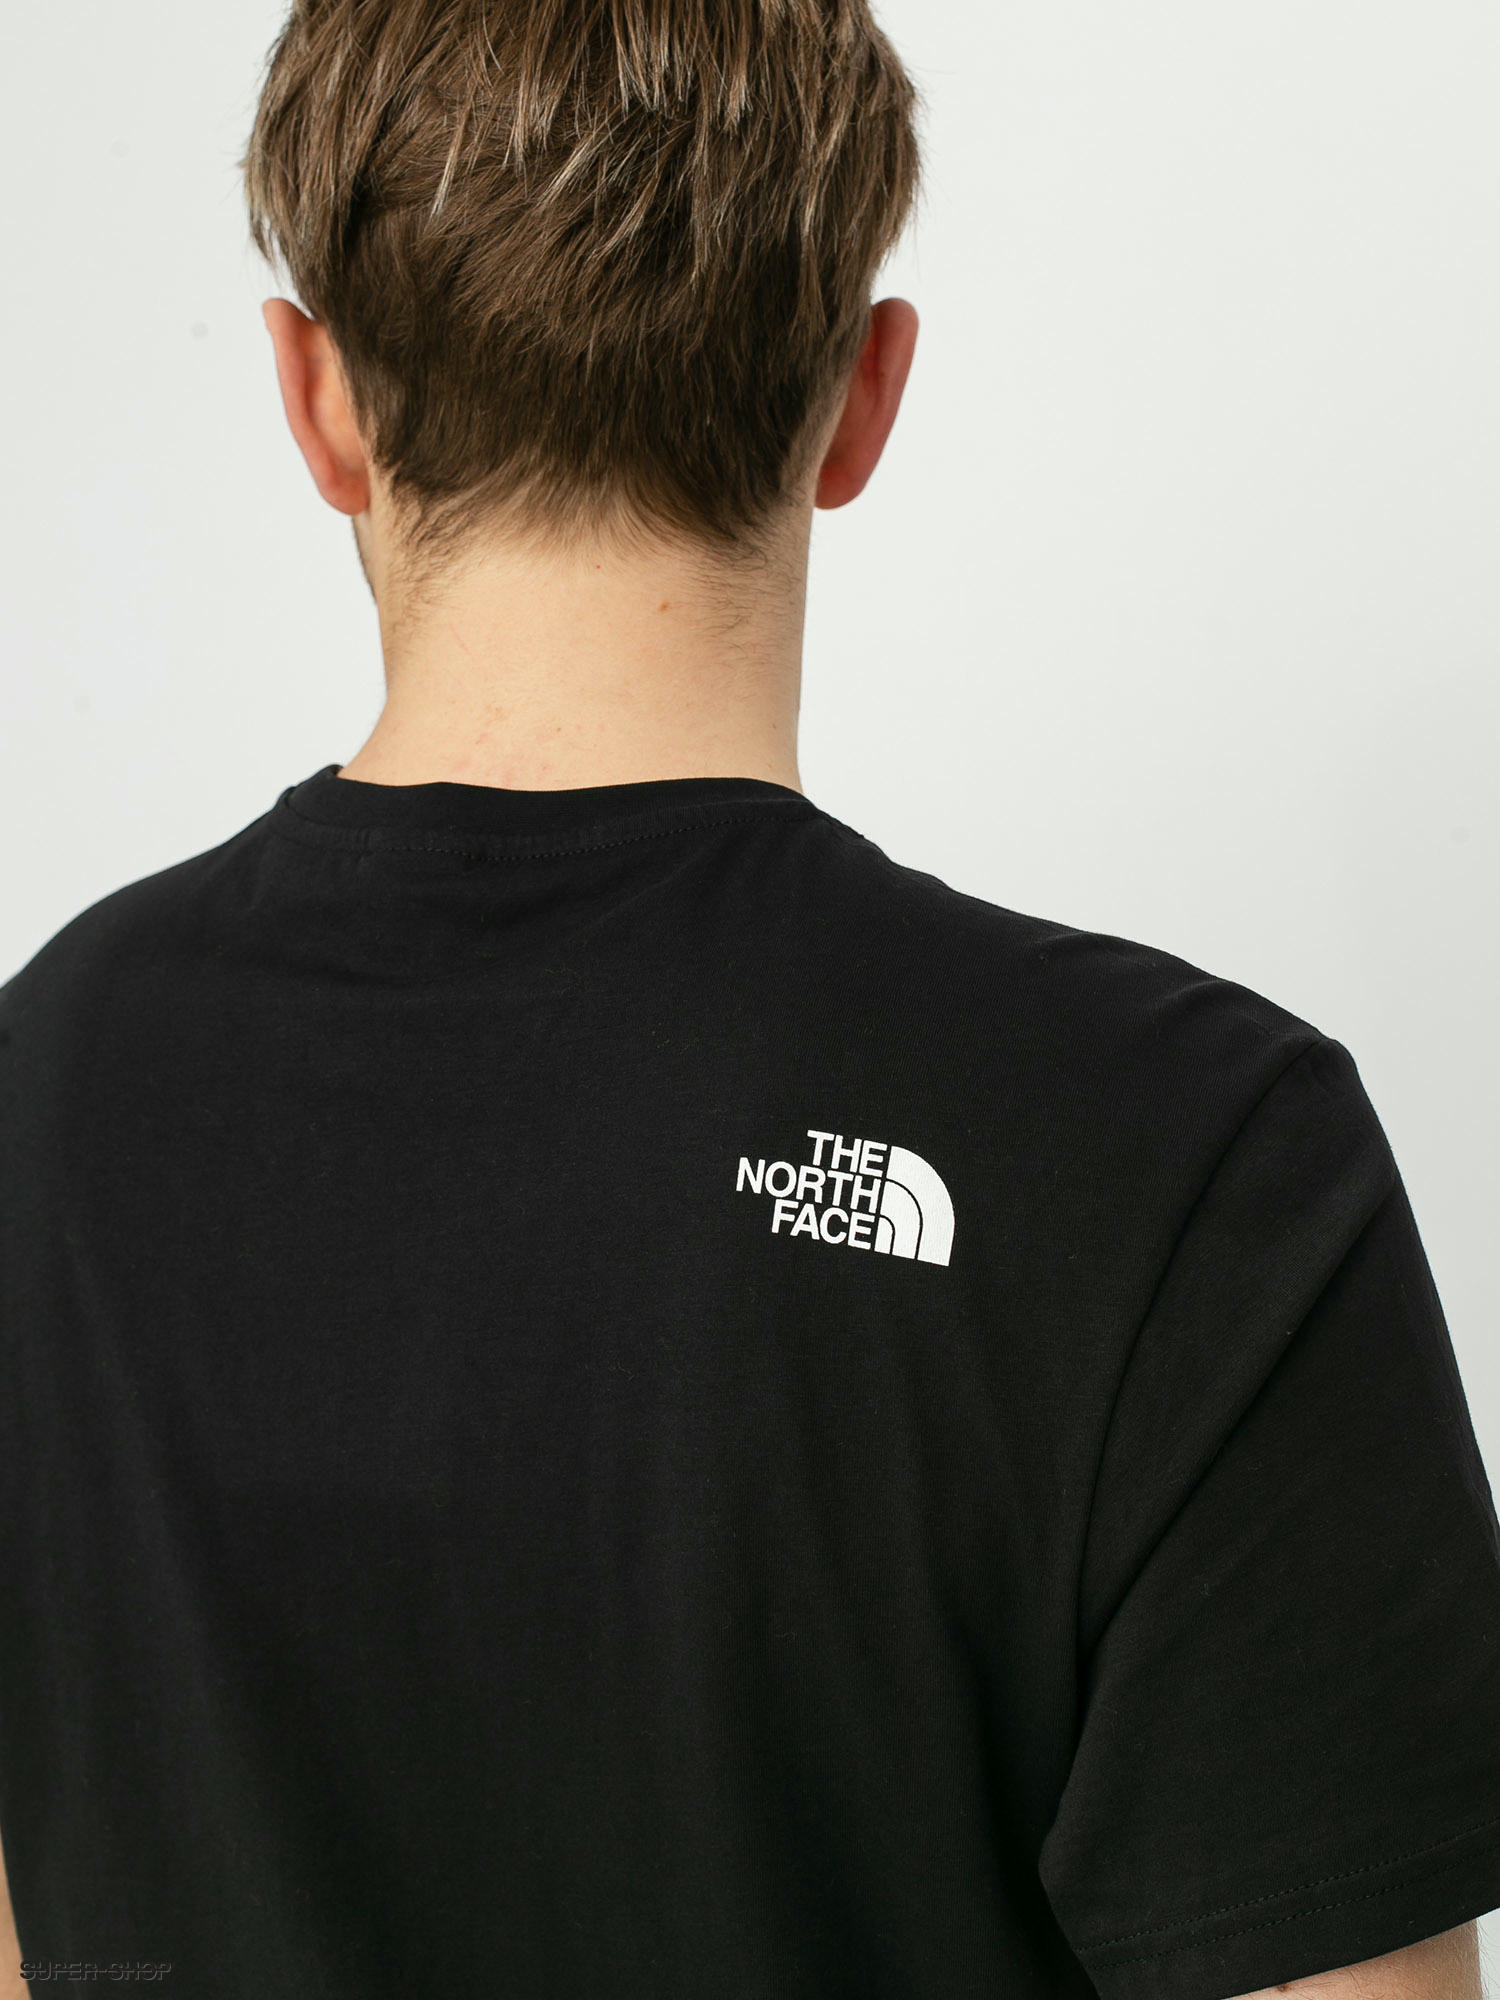 north face dome t shirt